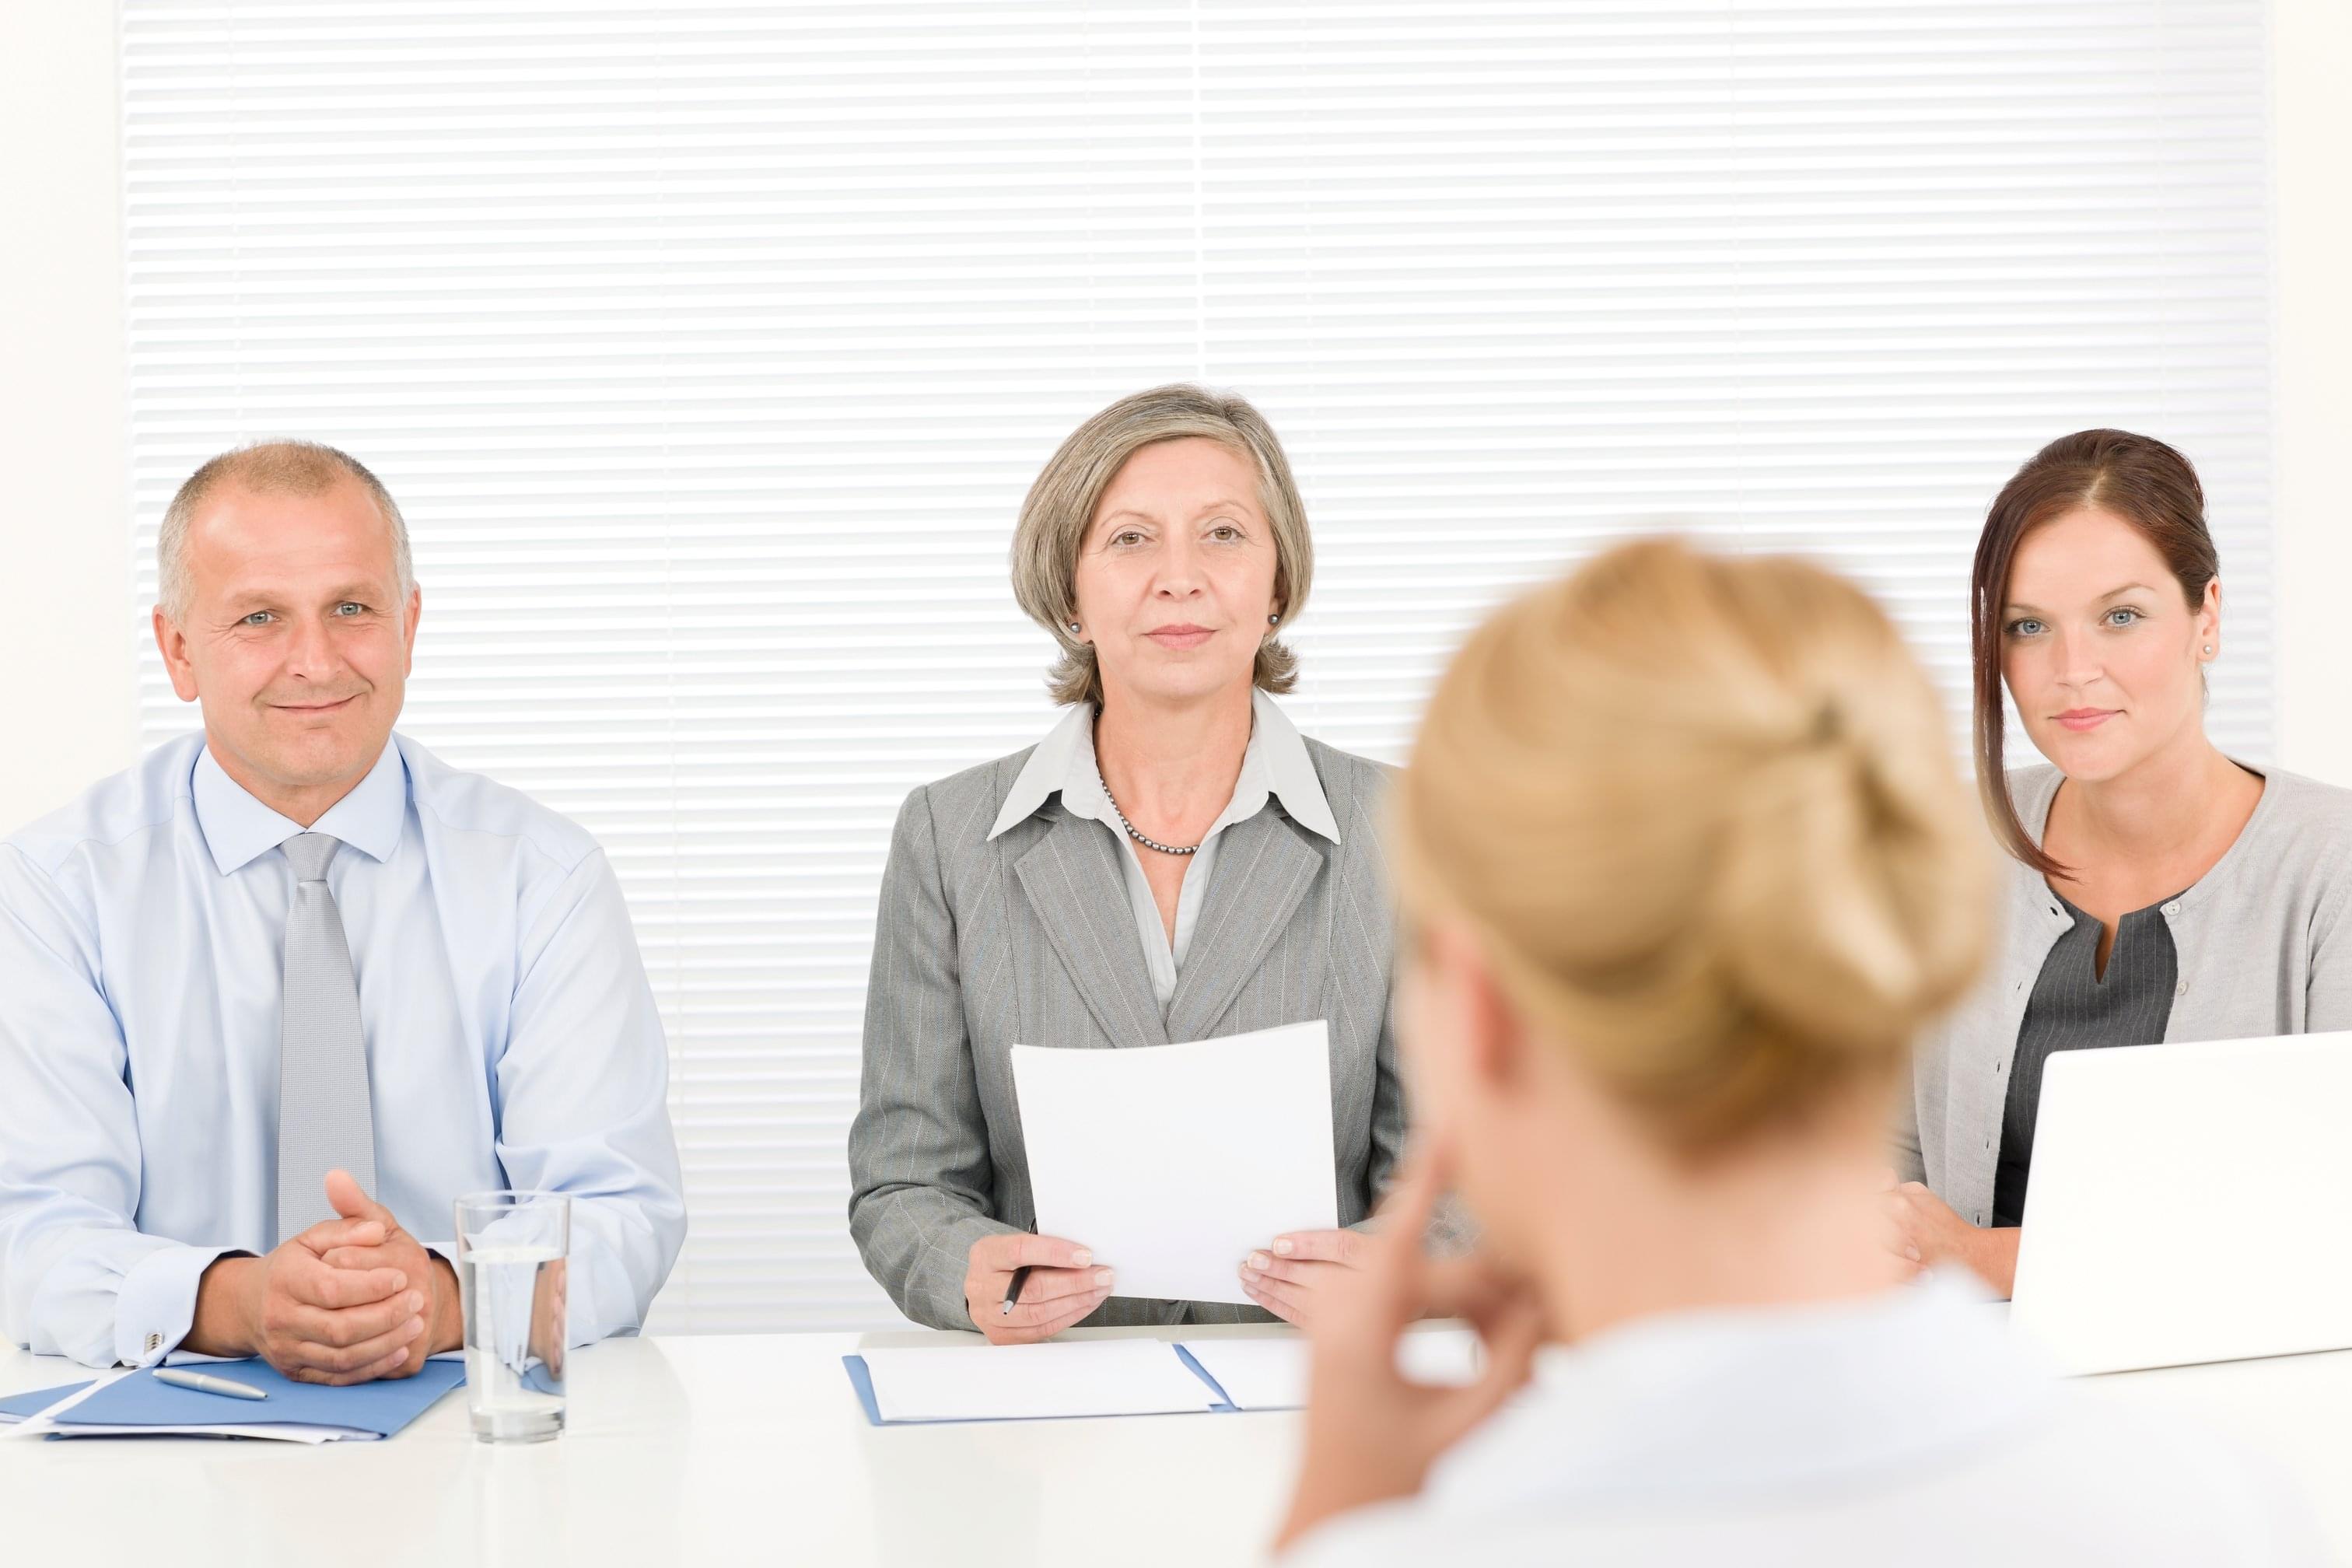 Illegal questions you should avoid during a job interview in Australia